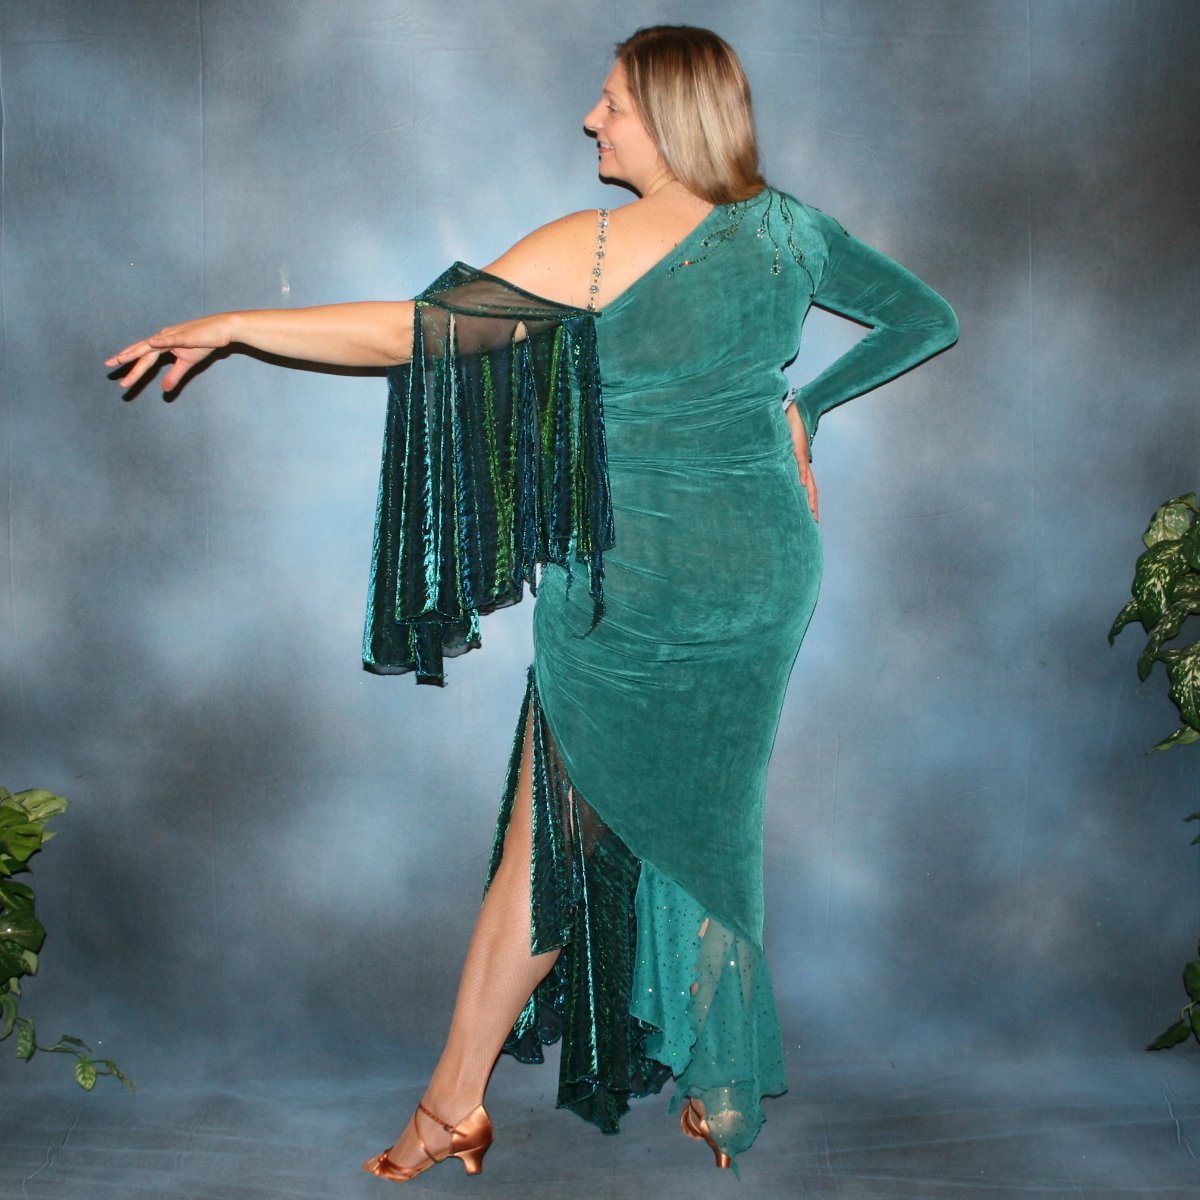 Crystal's Creations left back view of Plus size teal Latin/rhythm dress or tango dress was created in luxurious teal solid slinky with iridescent floats & flounces plus a few champagne sequined flounces at bottom skirting. It is embellished with finely detailed Swarovski stonework in blue zircon, blue zircon AB and emerald green